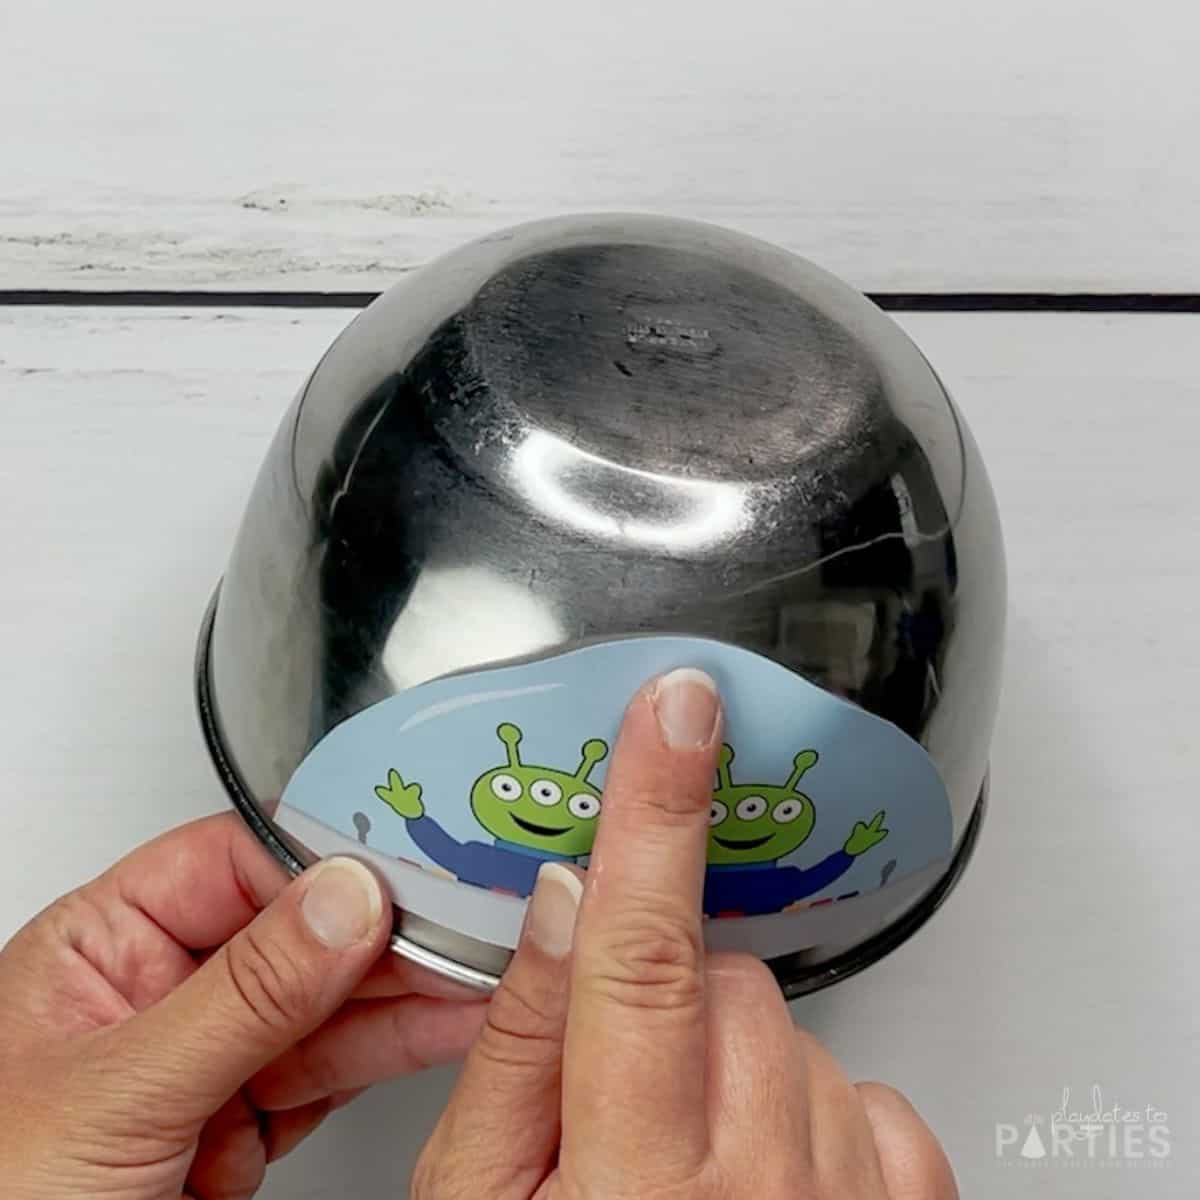 A woman's hand demonstrating how the top of the alien window won't lie flat on the mixing bowl.